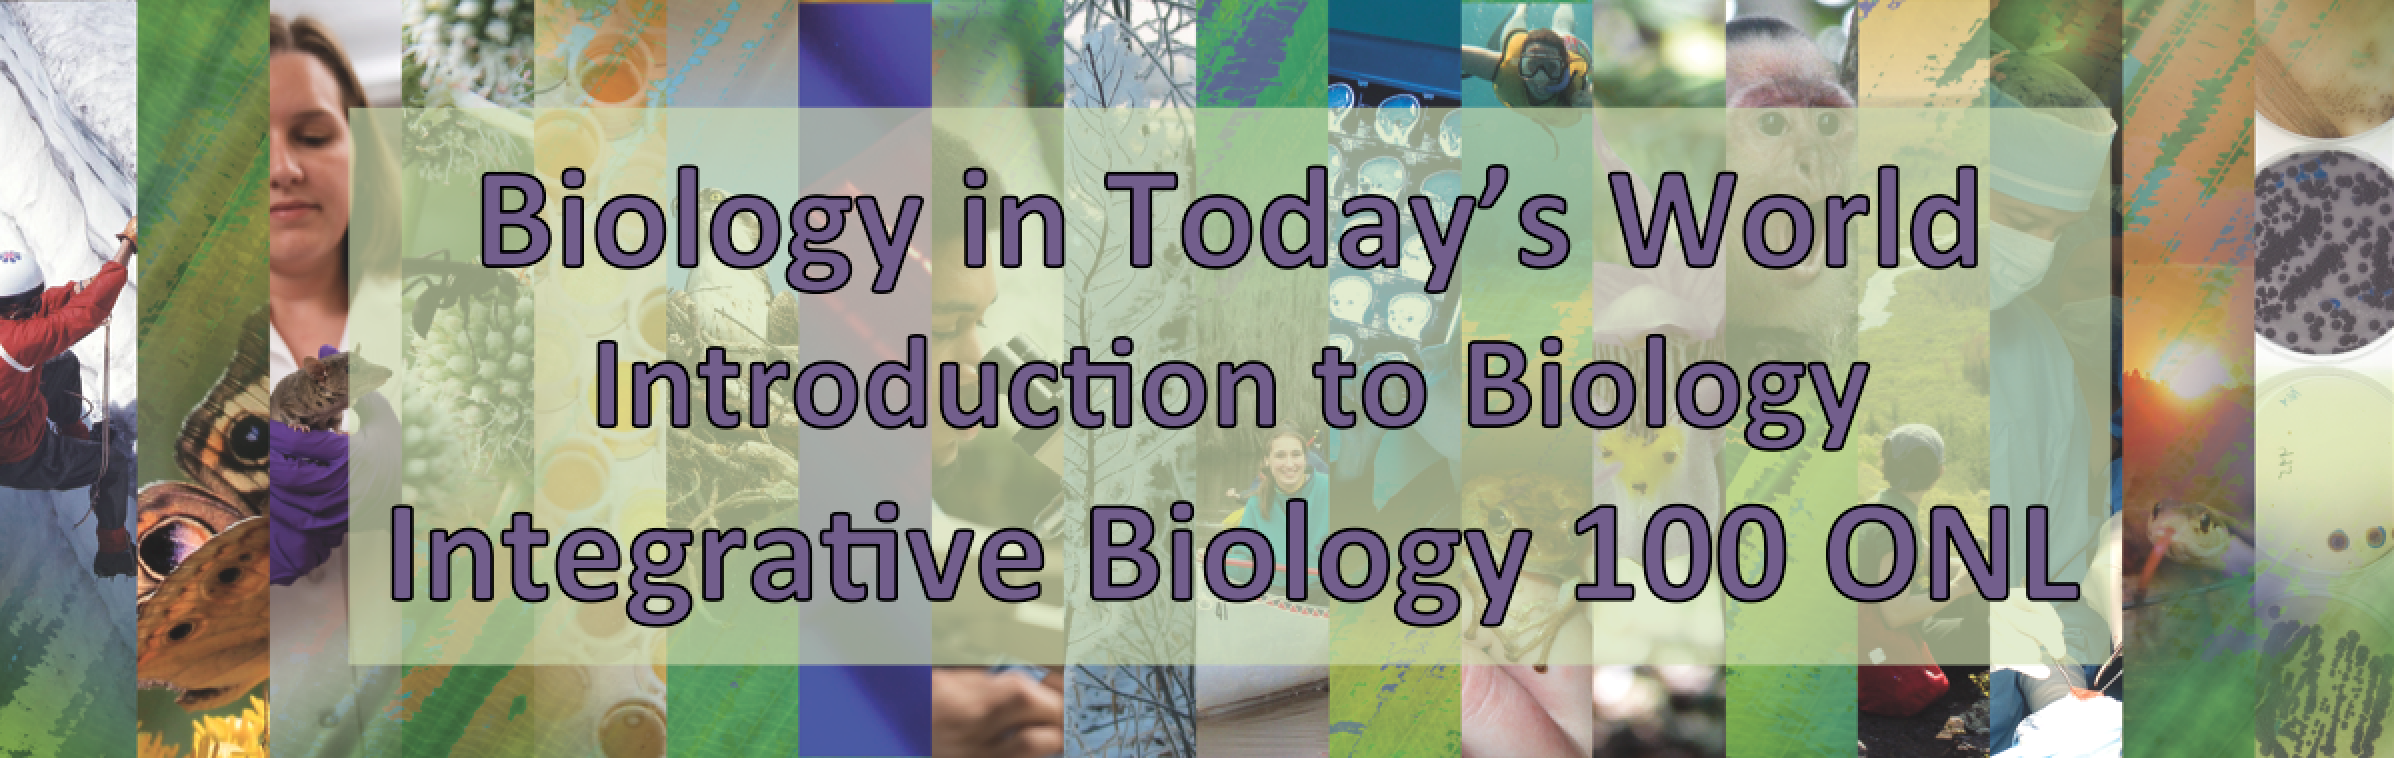 striped banner saying: Biology in Today's World, Introduction to Biology, Integrative Biology 100 ONL